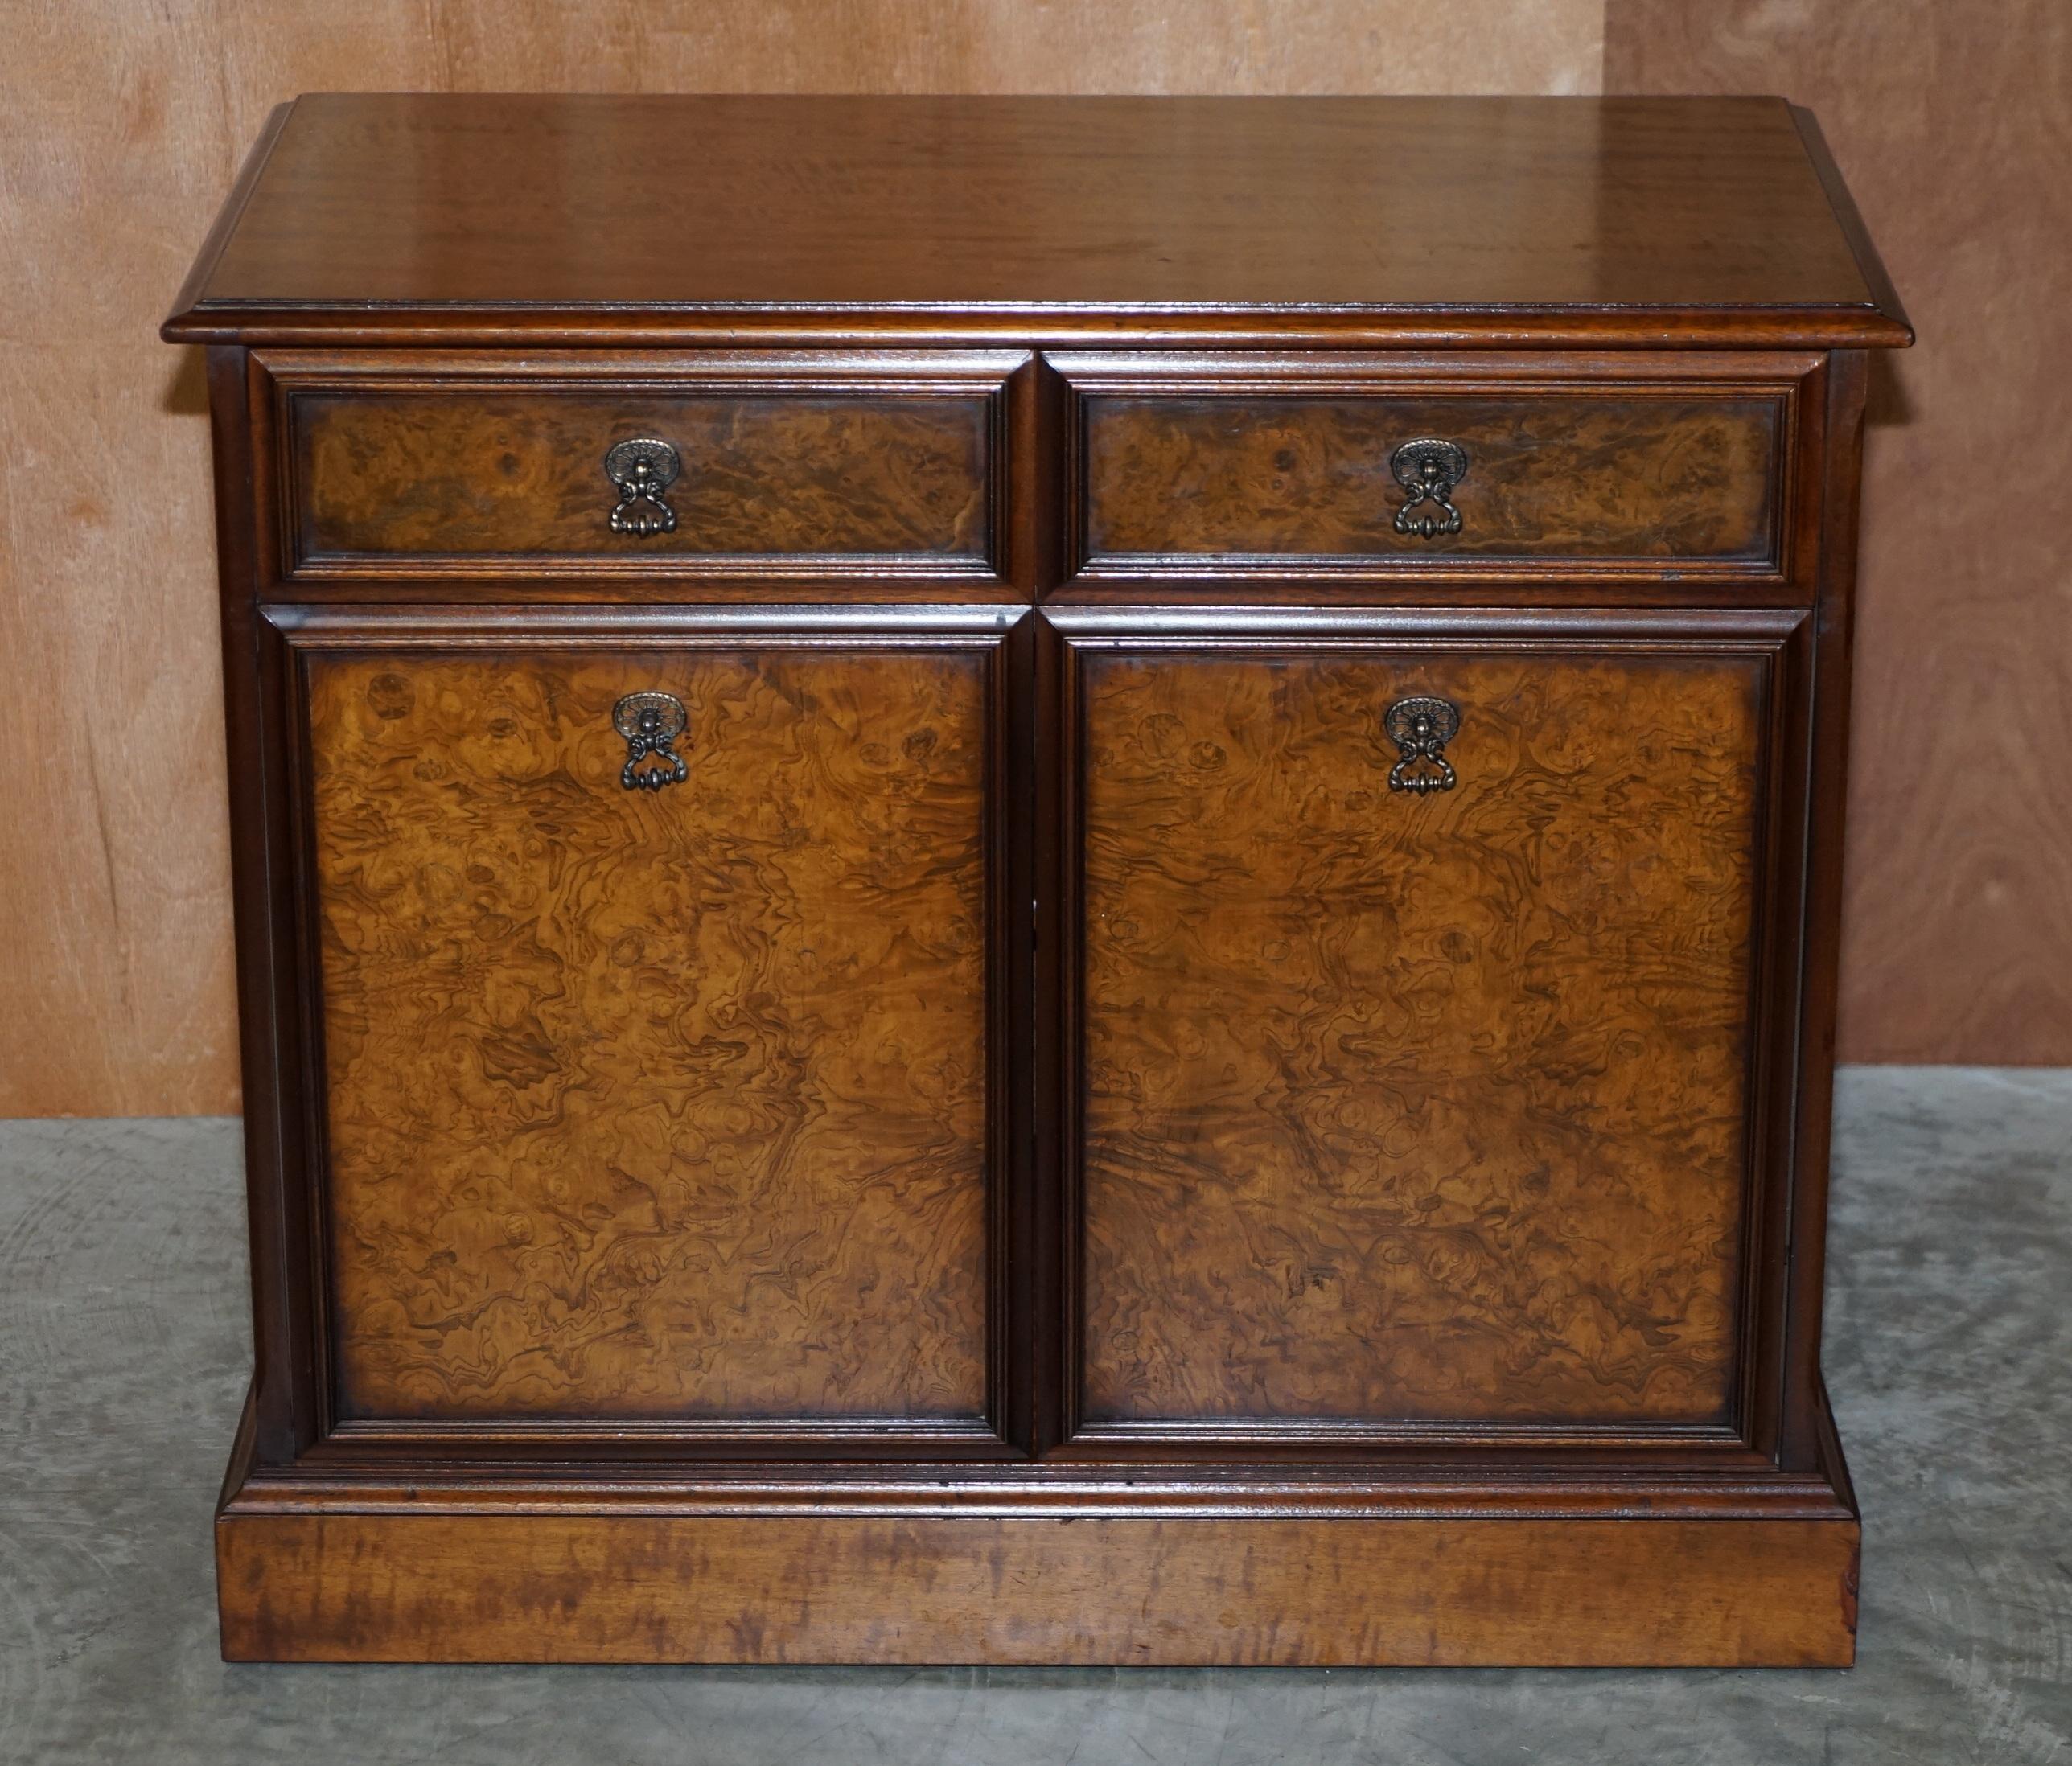 We are delighted to offer for sale this lovely twin drawer Burr & Quarter cut walnut sideboard

A good looking and well made piece which is very utilitarian, it can be used as a media cupboard, office storage or as a kitchen wears as it was